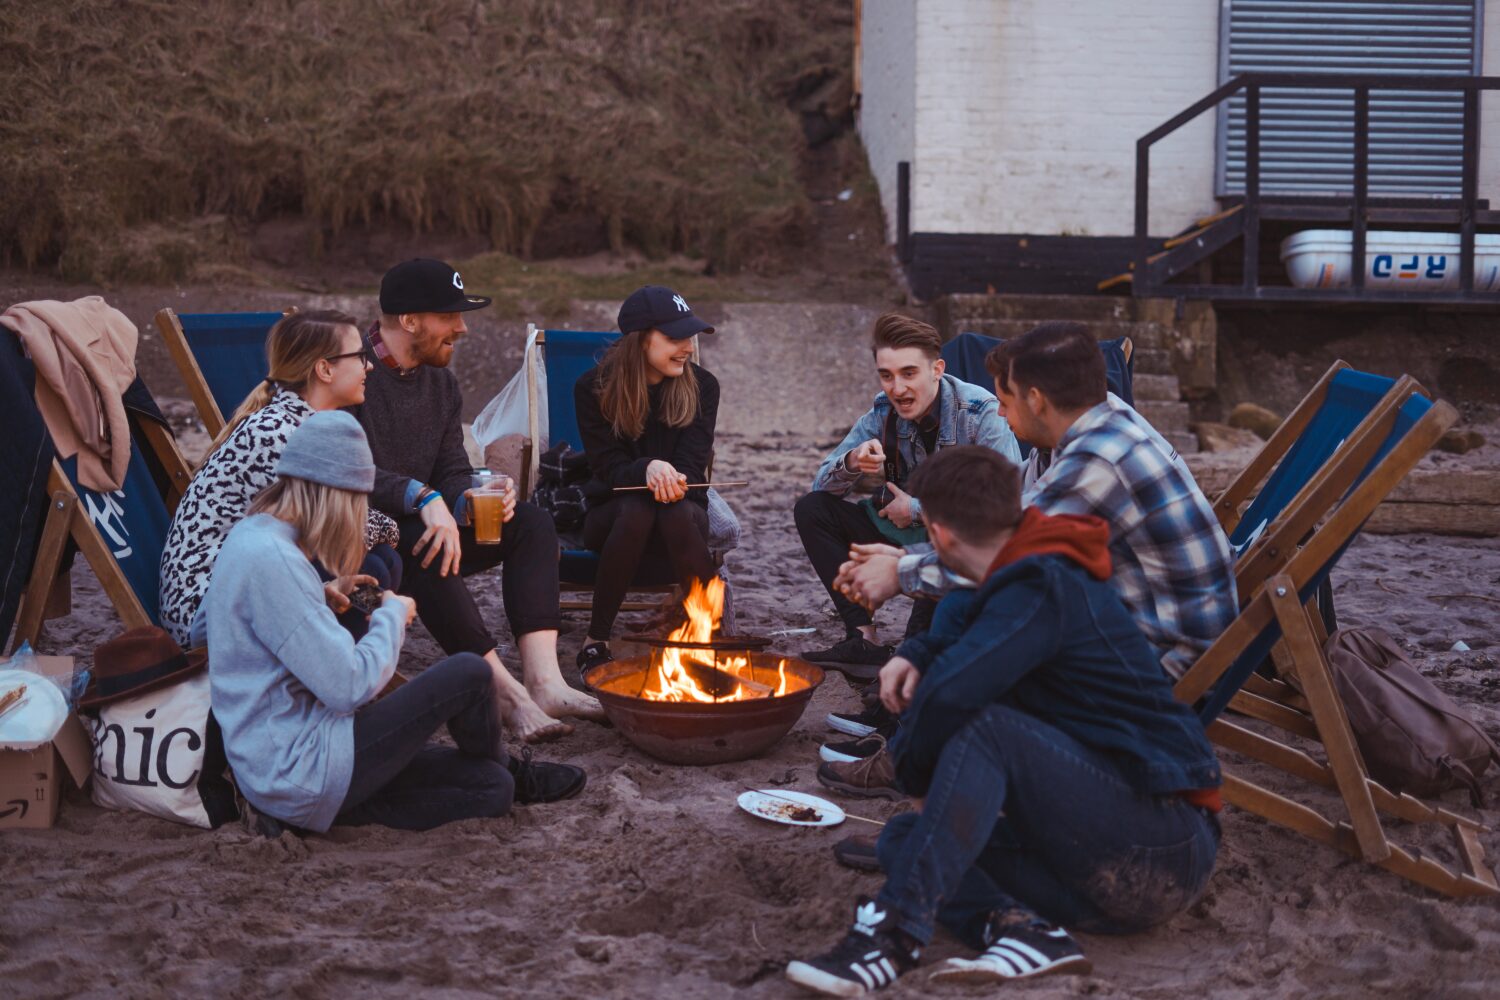 Friends talking in a circle around a campfire.